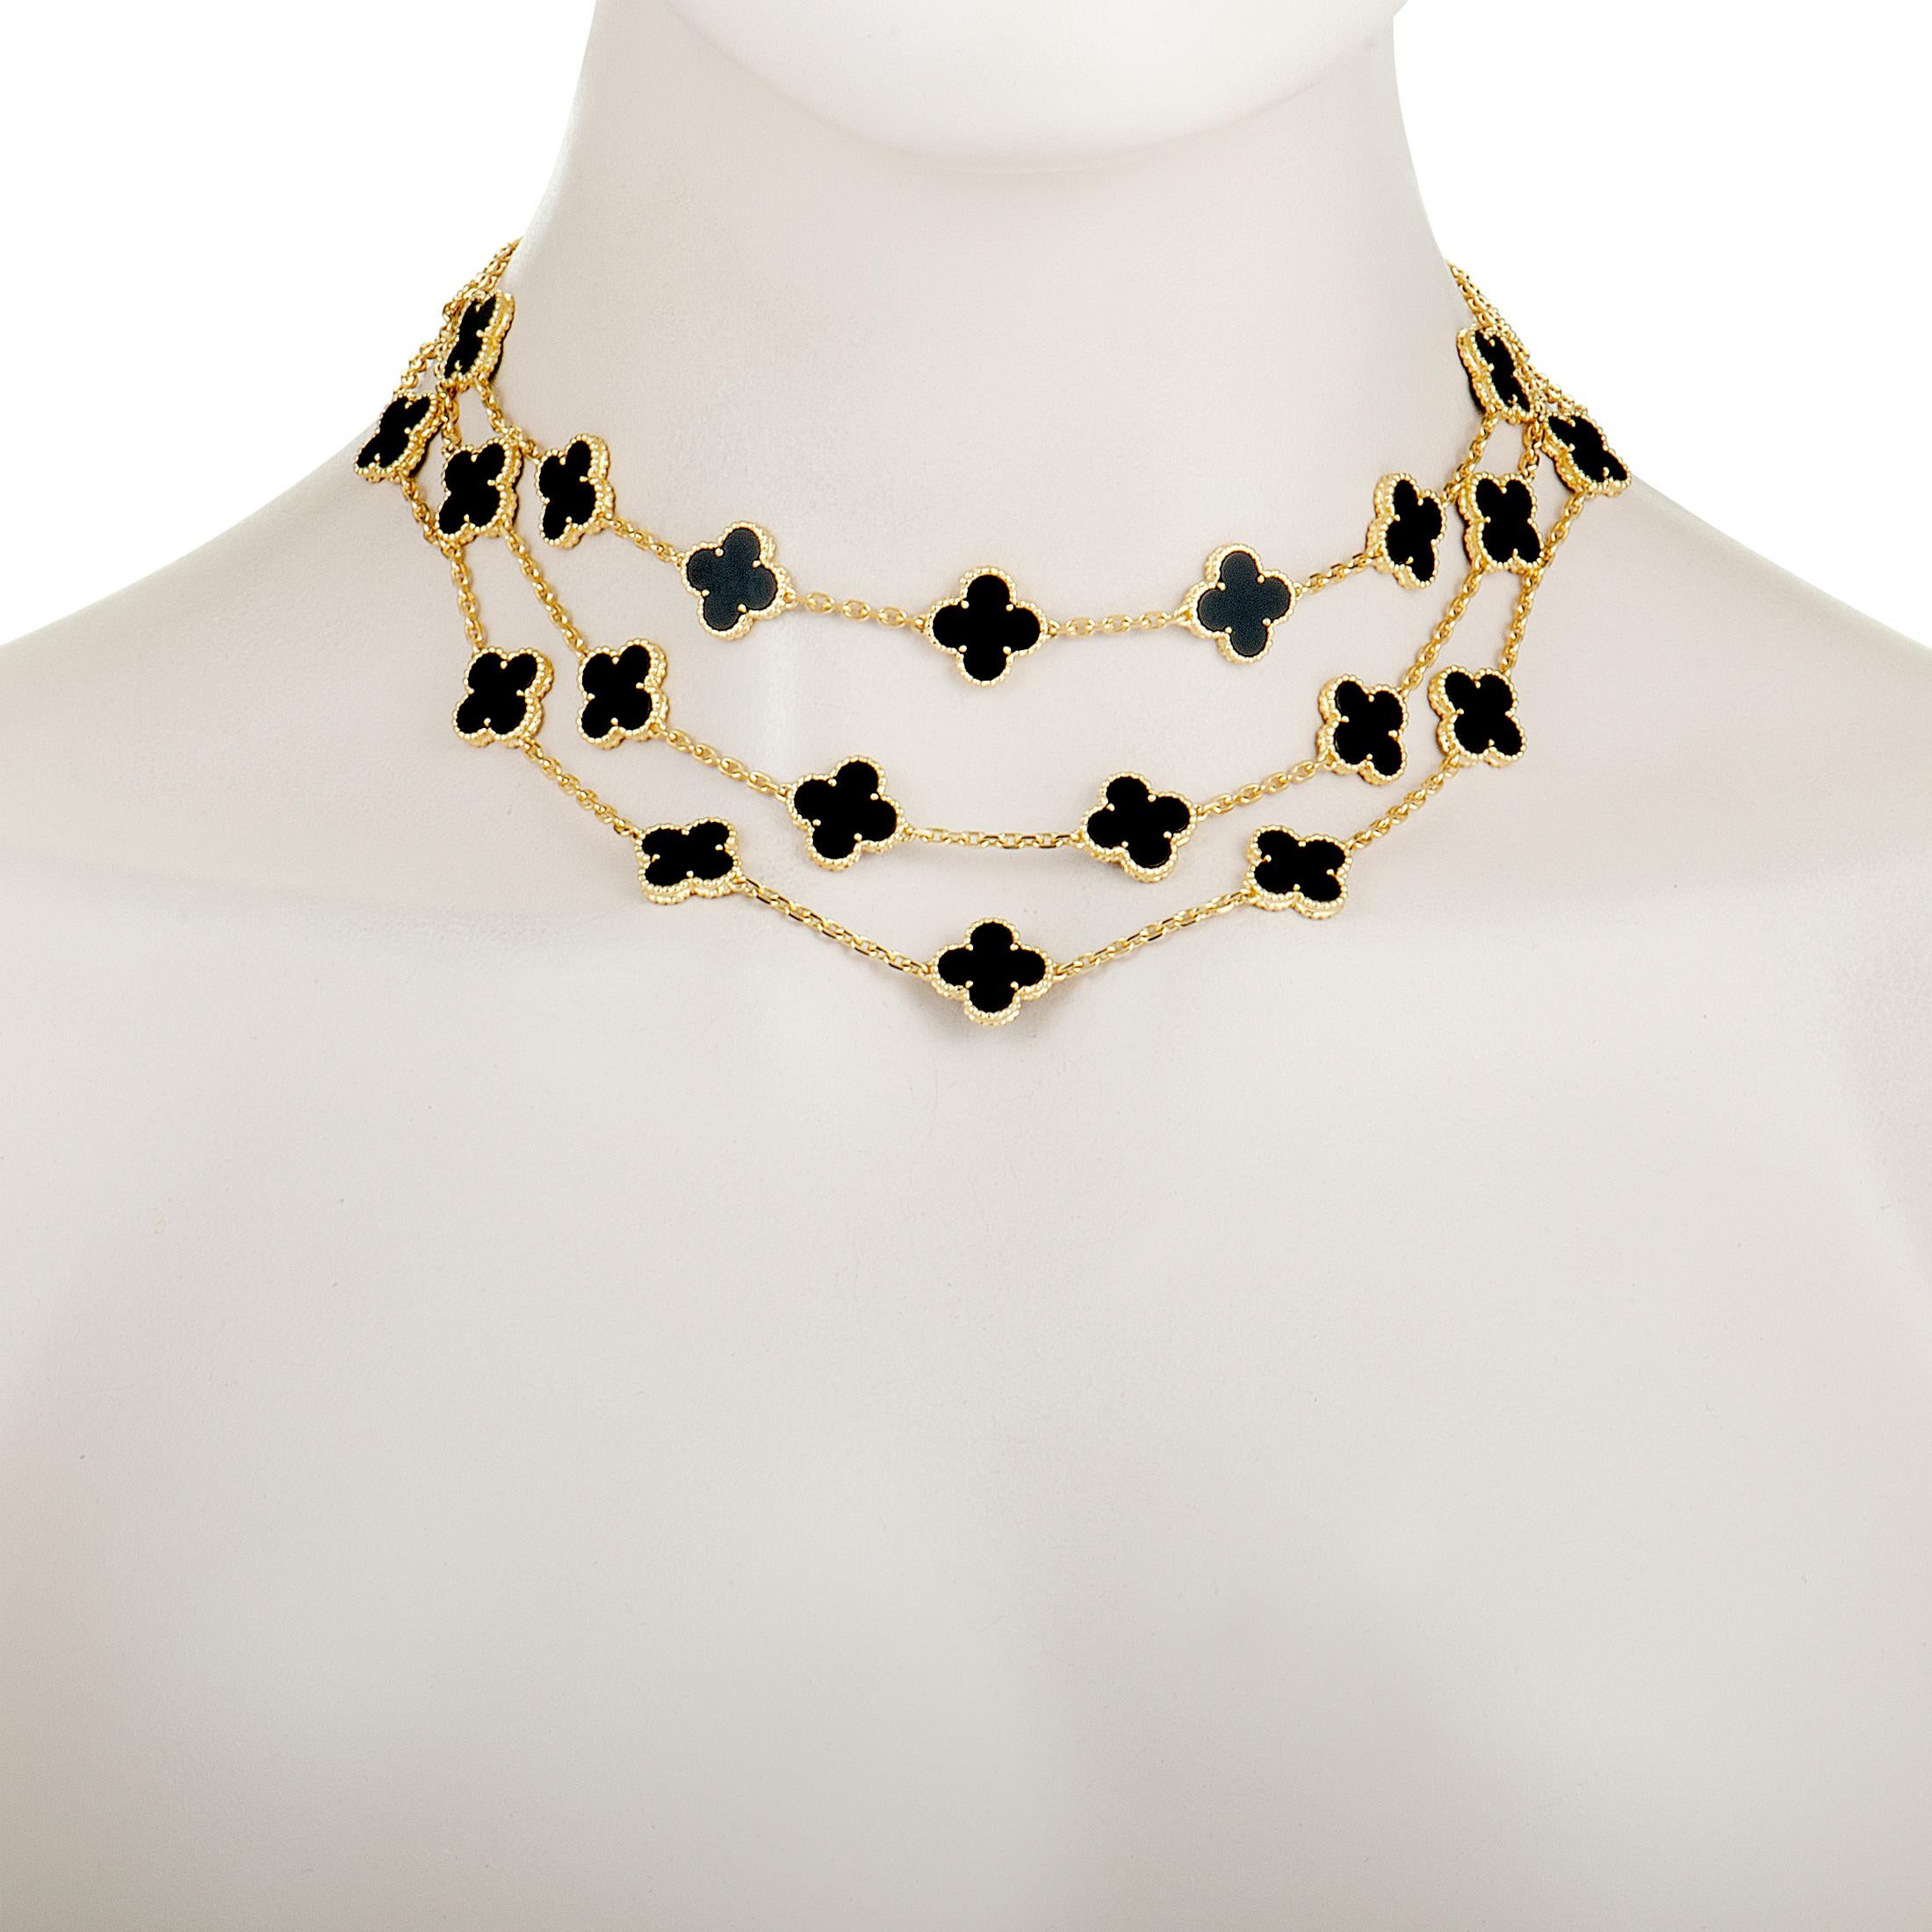 A very rare piece from the sublime “Alhambra” collection by Van Cleef & Arpels, this exquisite necklace compels with its luxurious radiance and classy appeal. The necklace is expertly crafted from 18K yellow gold and it is embellished with onyx-set